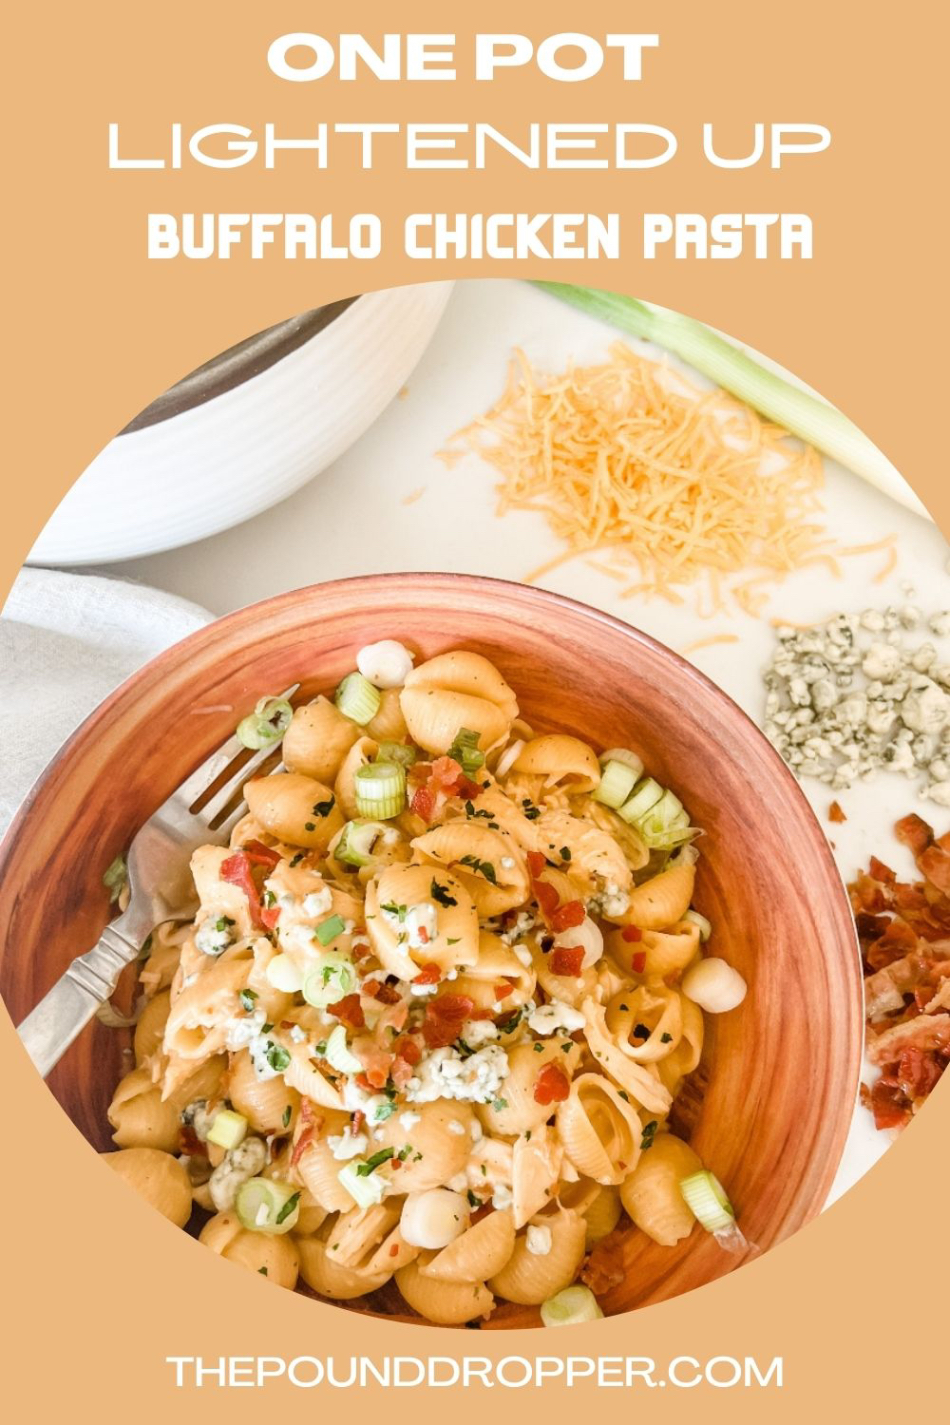 This One Pot Lightened Up Buffalo Chicken Pasta is simple recipe that’s made in one pot-making for an easy clean up while delivering AMAZING flavor! This is the perfect weeknight meal! A creamy, cheesy, buffalo sauce tossed in chicken and pasta-it's comfort food at its finest! via @pounddropper